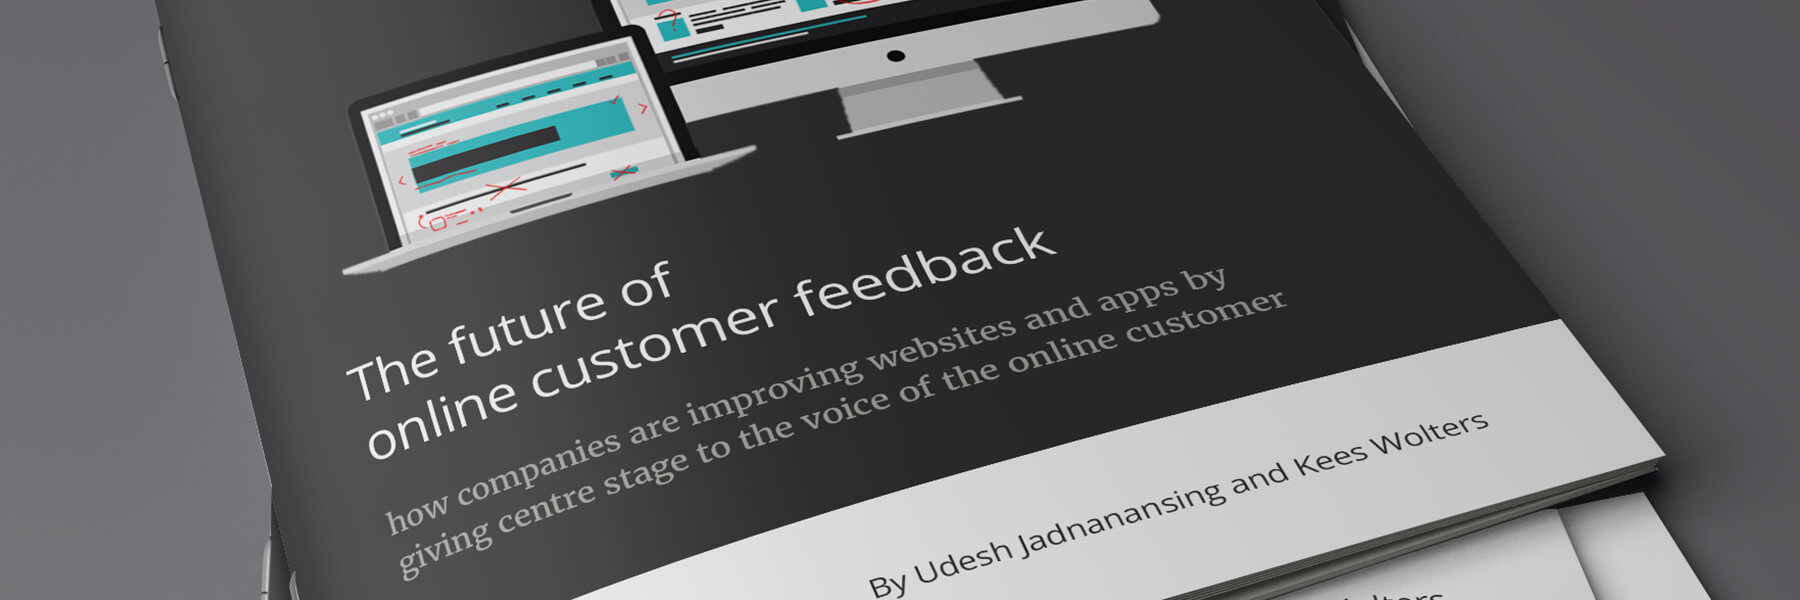 New White Paper Released: The Future of Online Customer Feedback